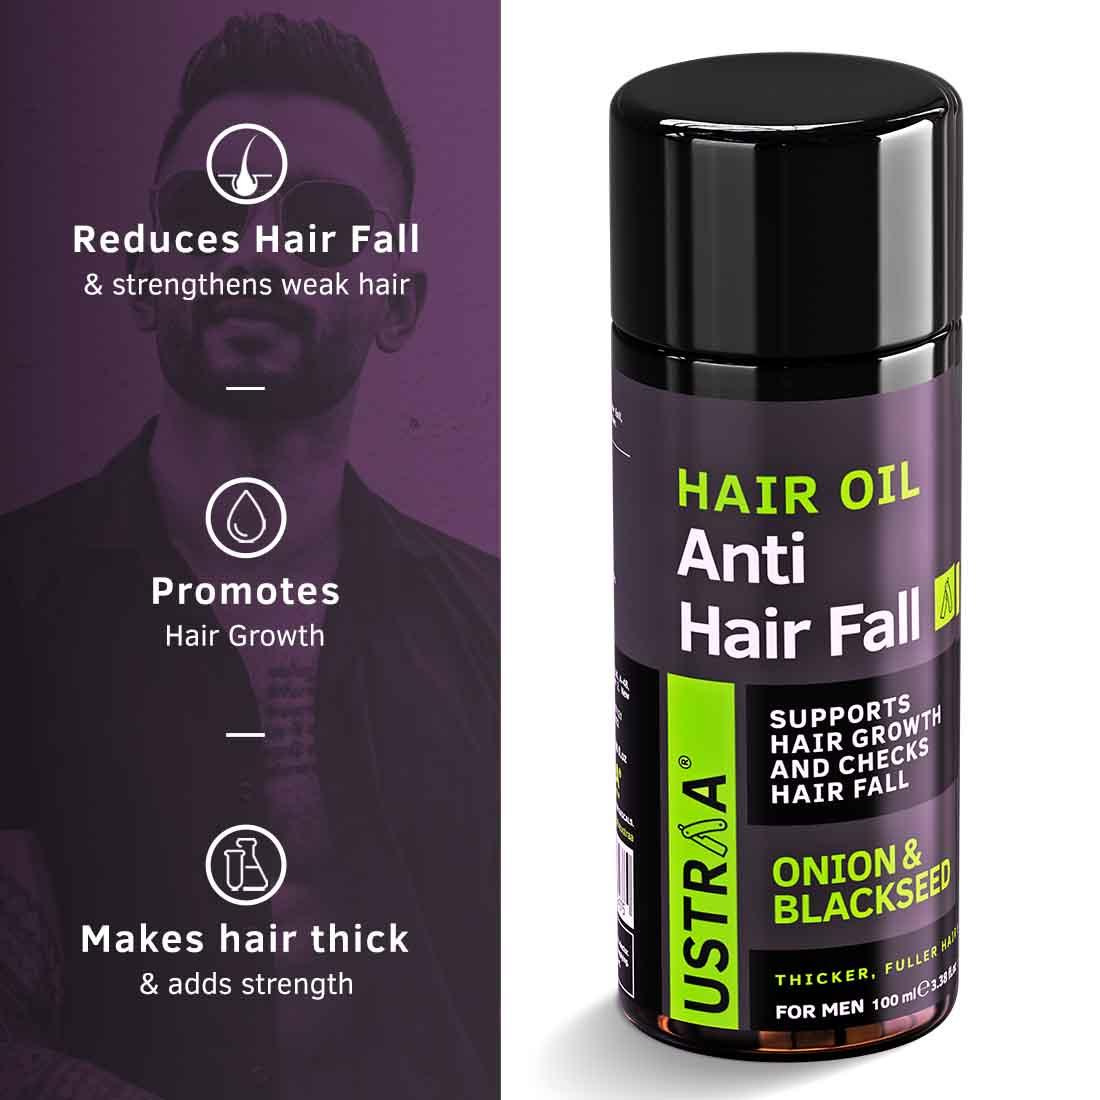 Buy Ustraa Hair Growth Cream  For Scalp Hair 18 Active Ingredients For  Men Online at Best Price of Rs 33932  bigbasket